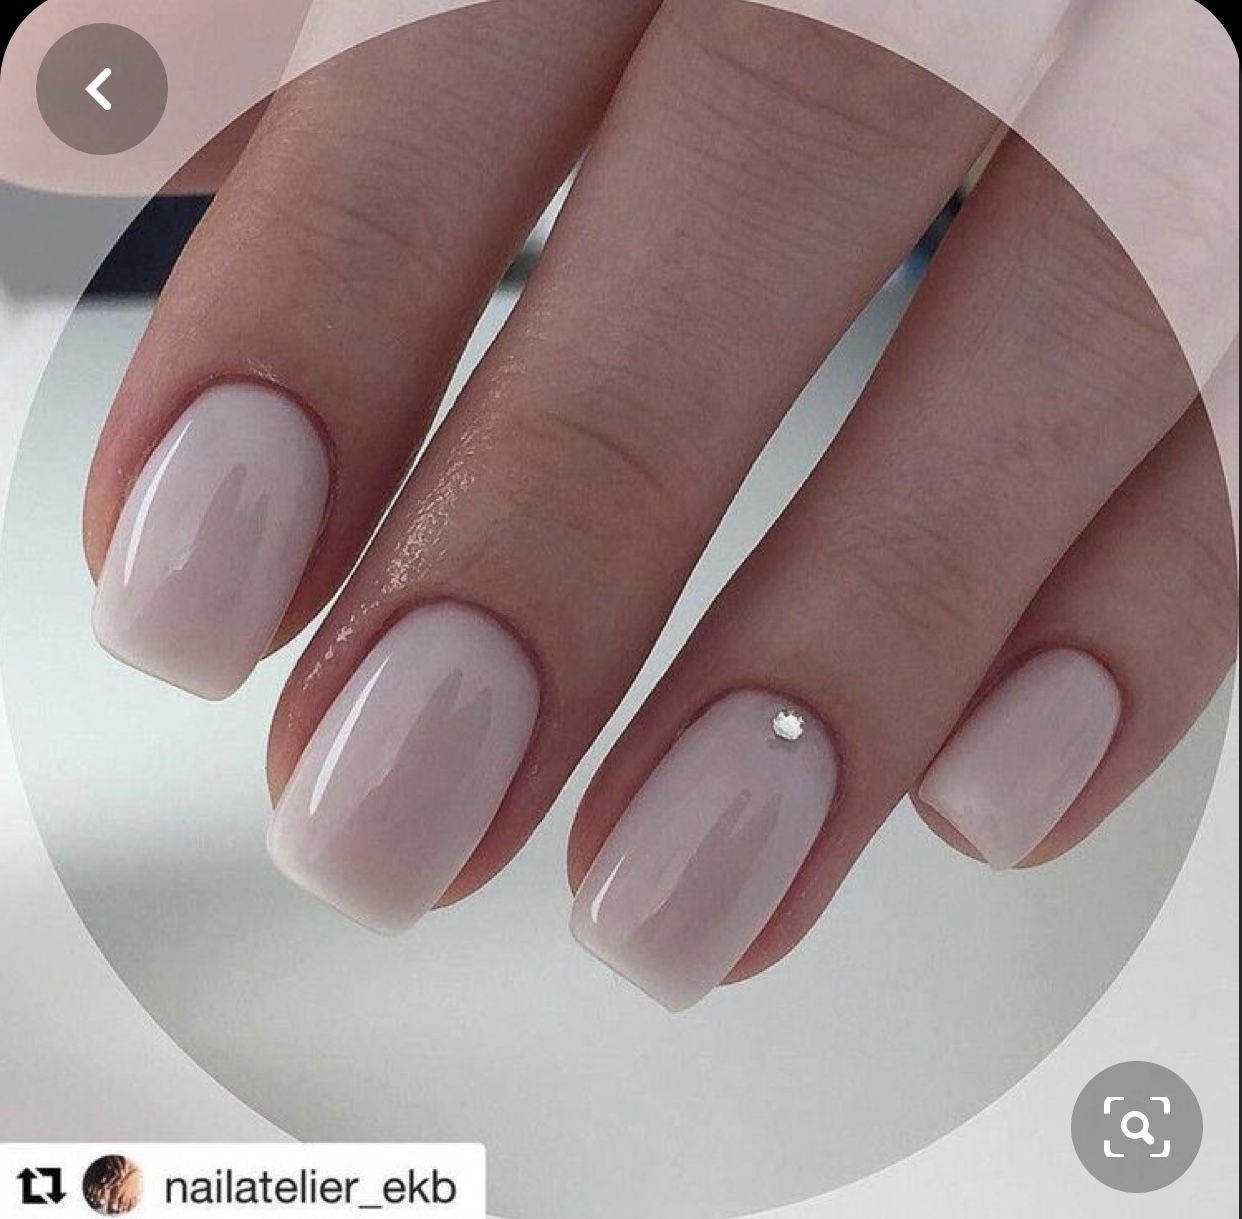 Pin By Denisa On Nails In 2020 Pink Manicure Pink Nails Pale Pink Nails